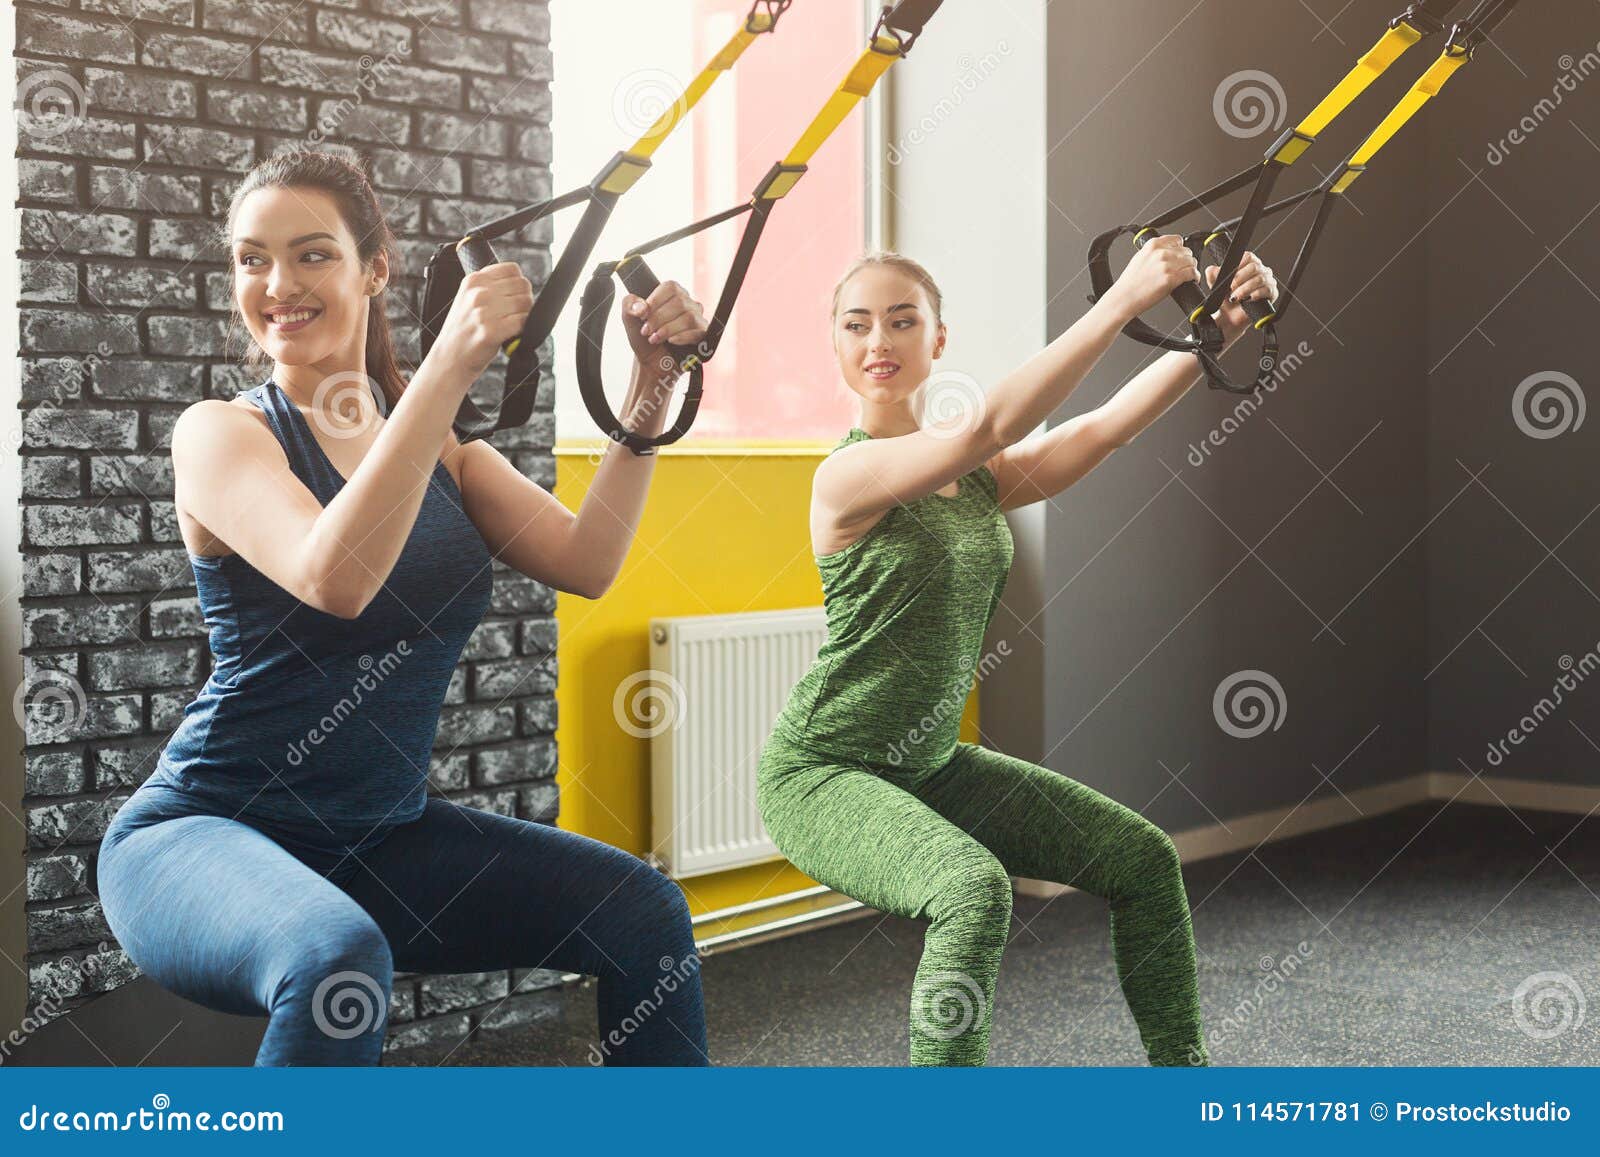 Women Performing TRX Suspension Training in Gym Stock Image